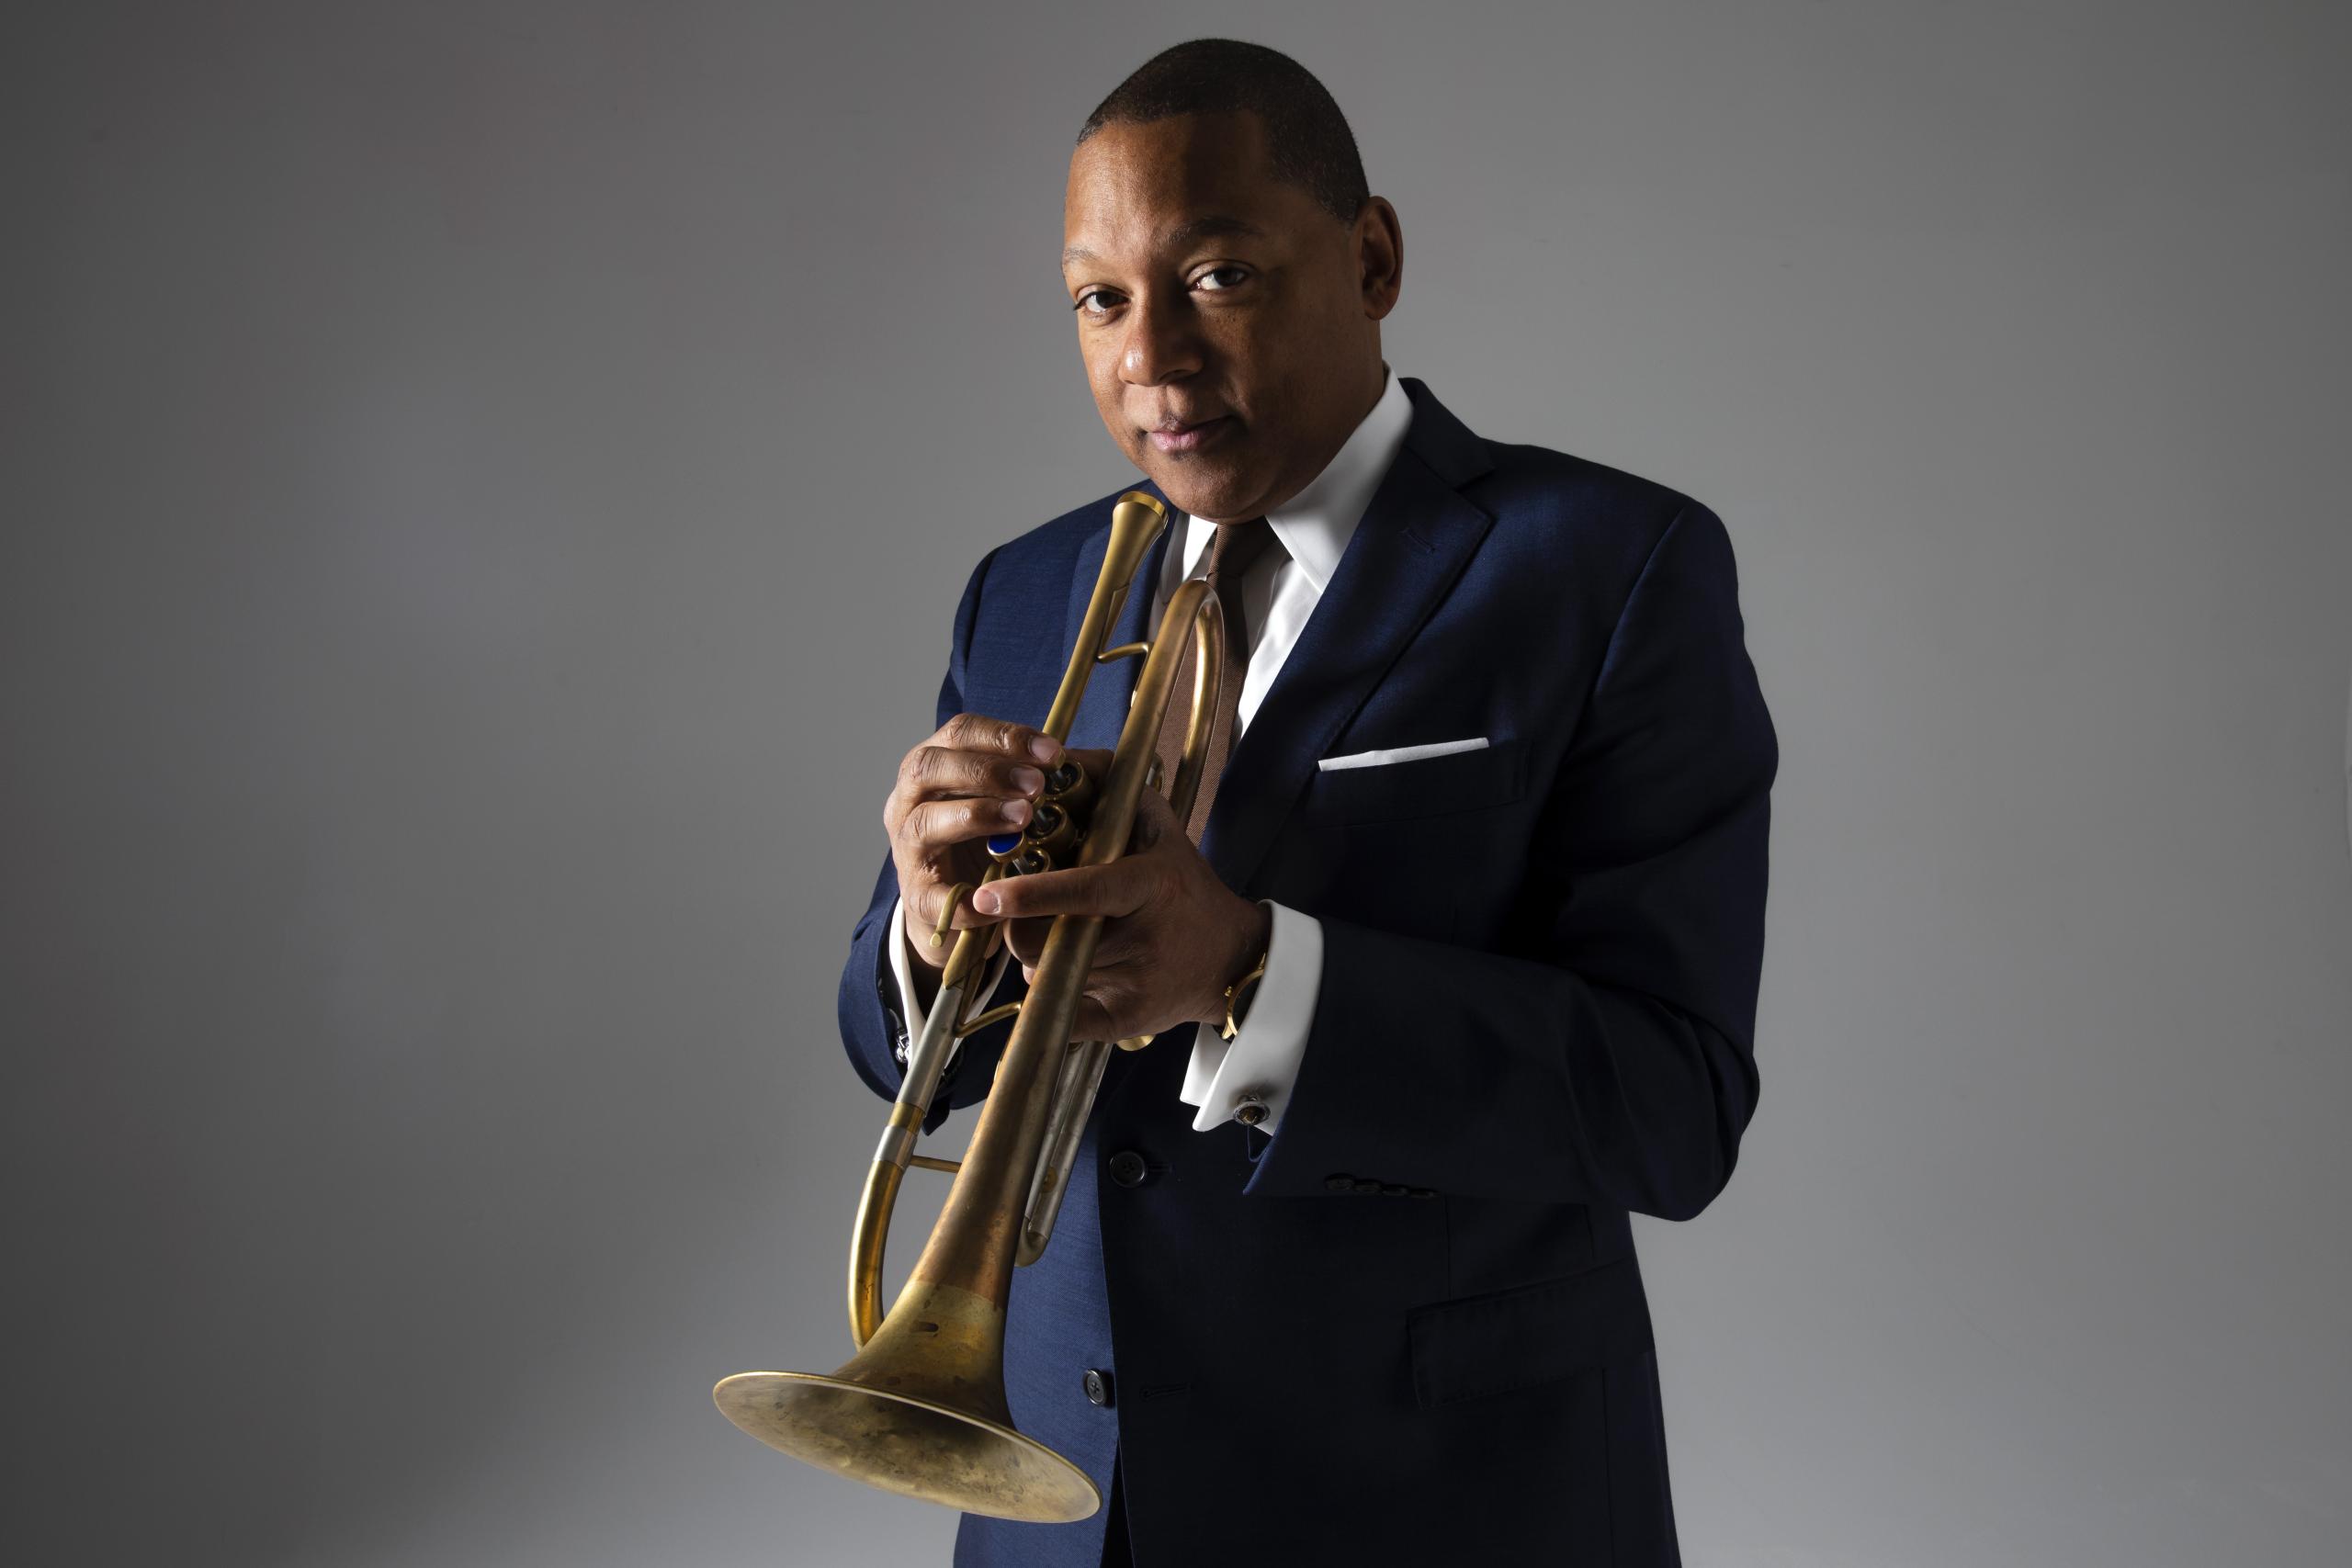 Trumpeter Marsalis with his instrument in a dark blue suit.